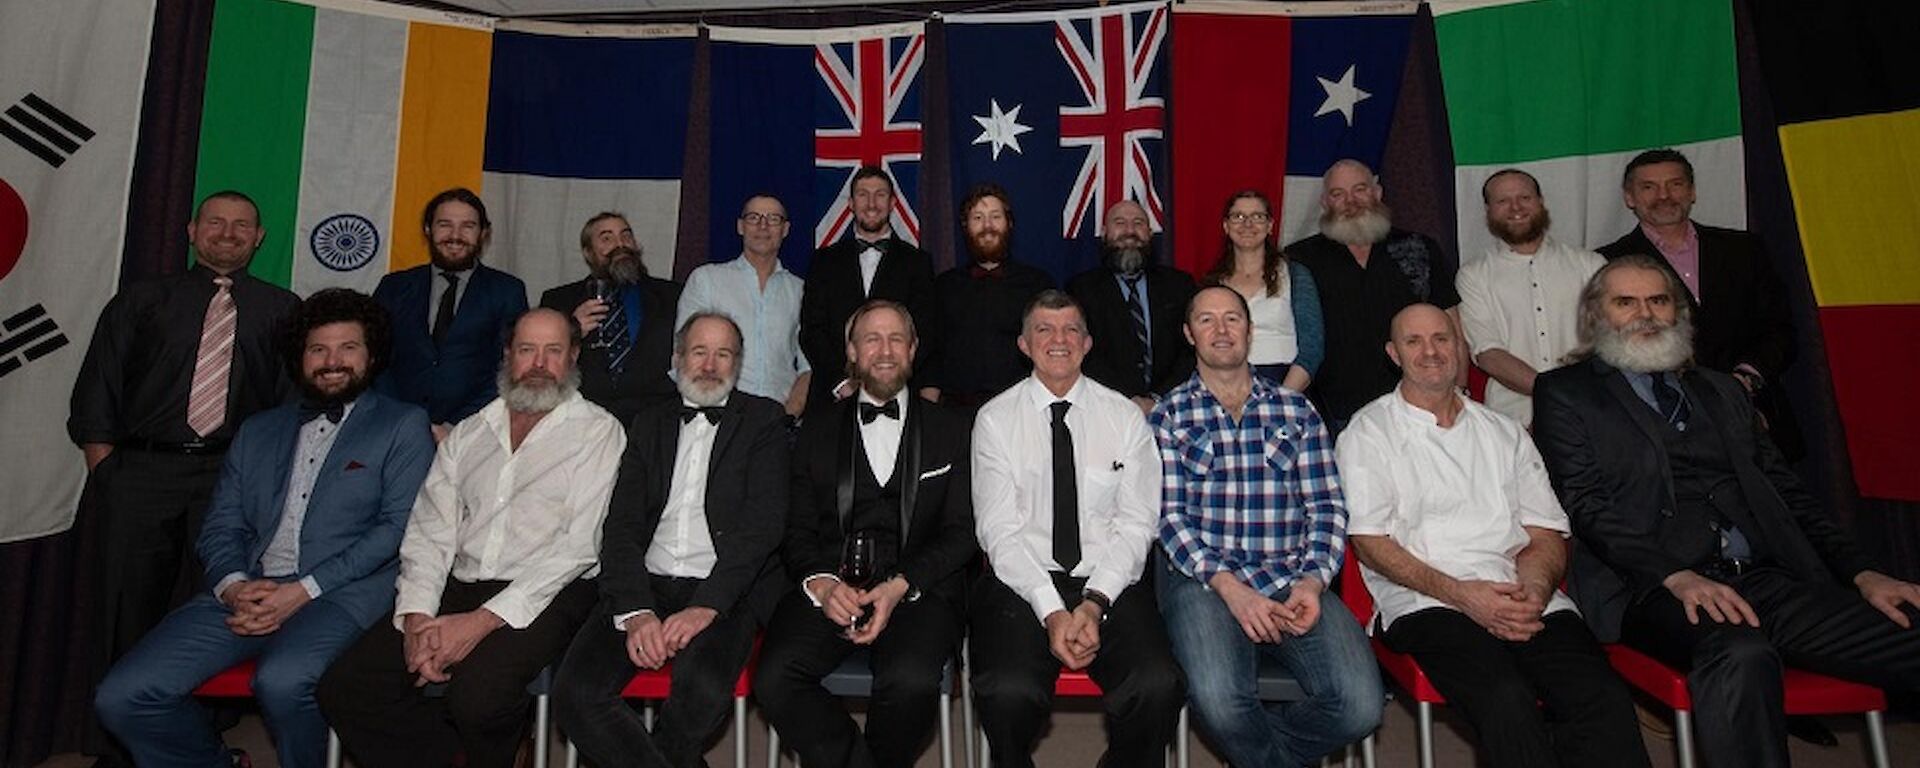 Group photo of expeditioners wearing formal clothes